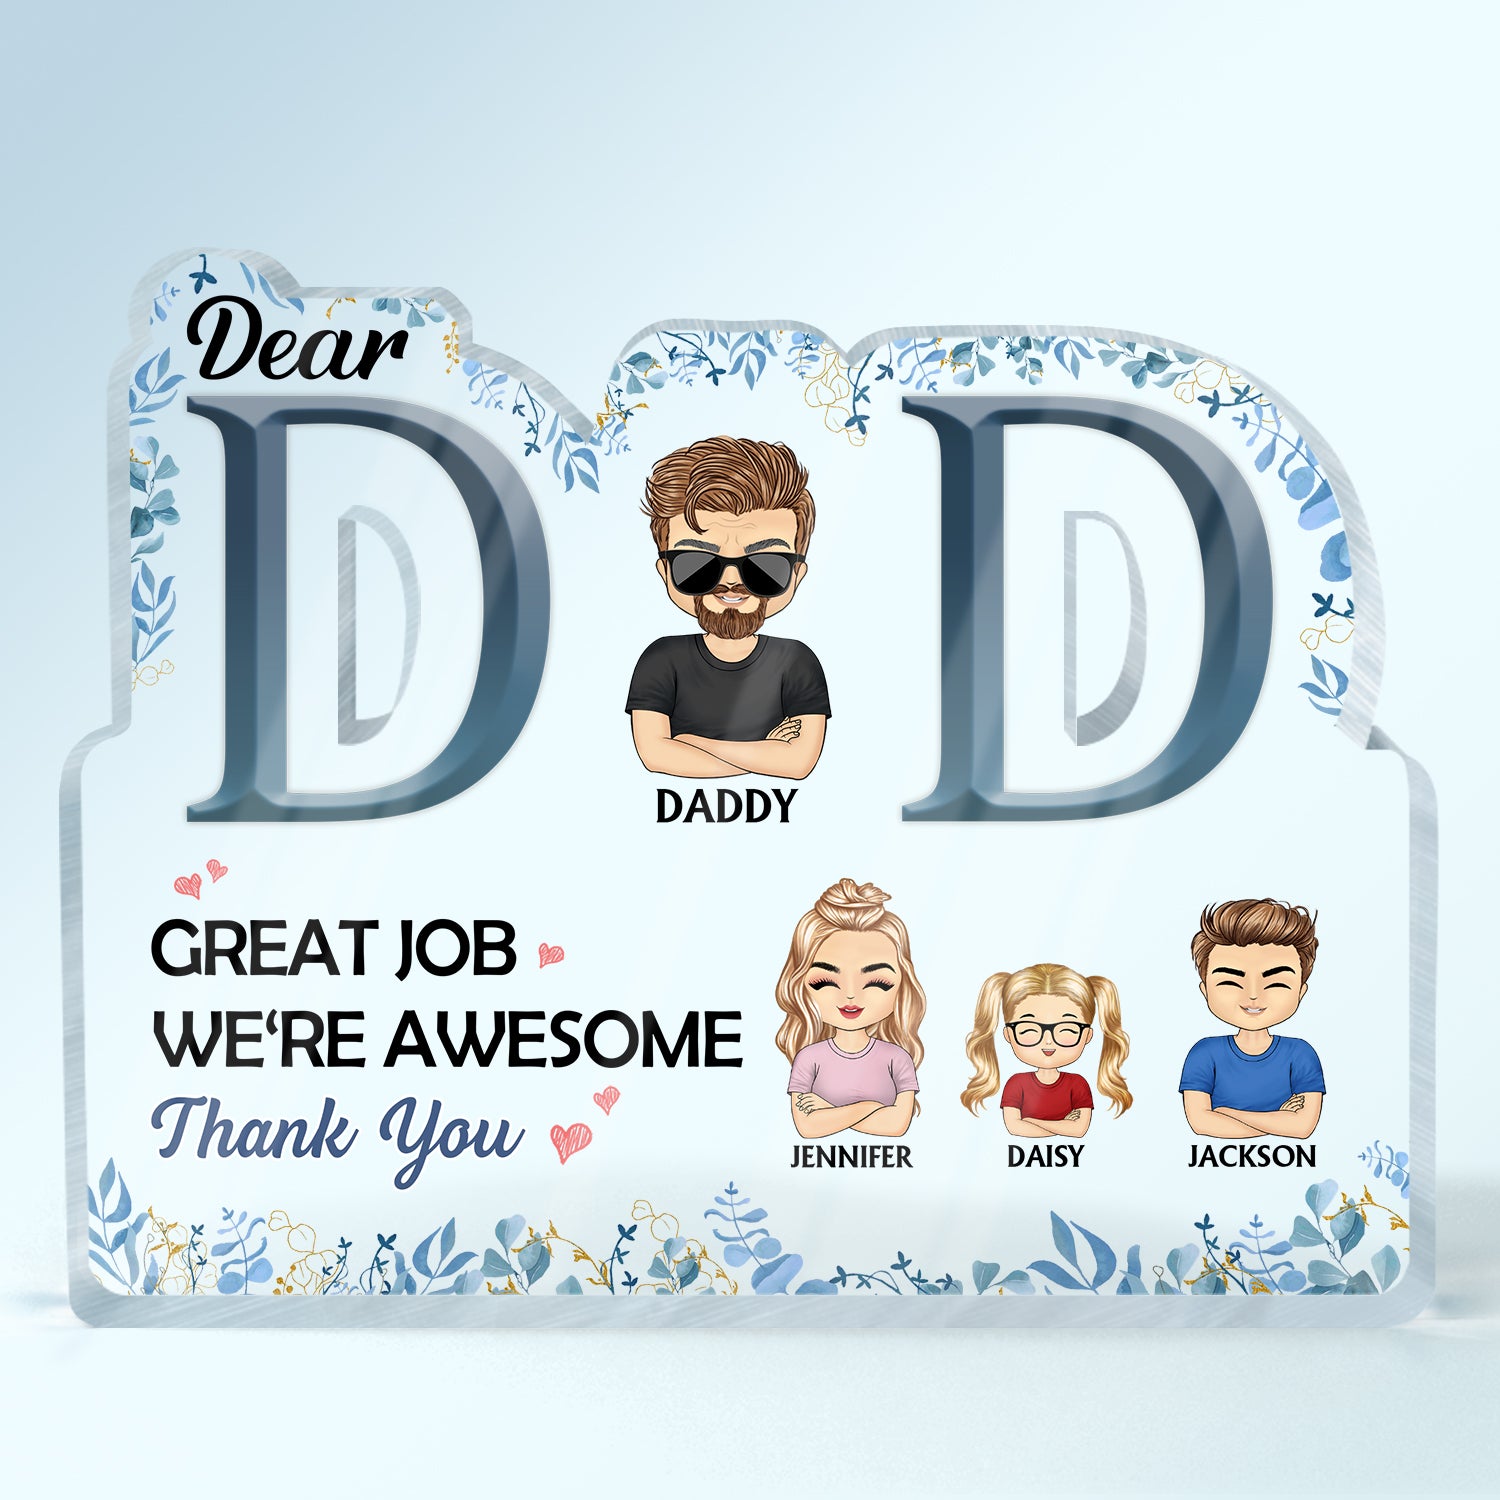 Dear Dad Great Job We're Awesome - Birthday Gift For Father, Grandpa, Family - Personalized Custom Shaped Acrylic Plaque